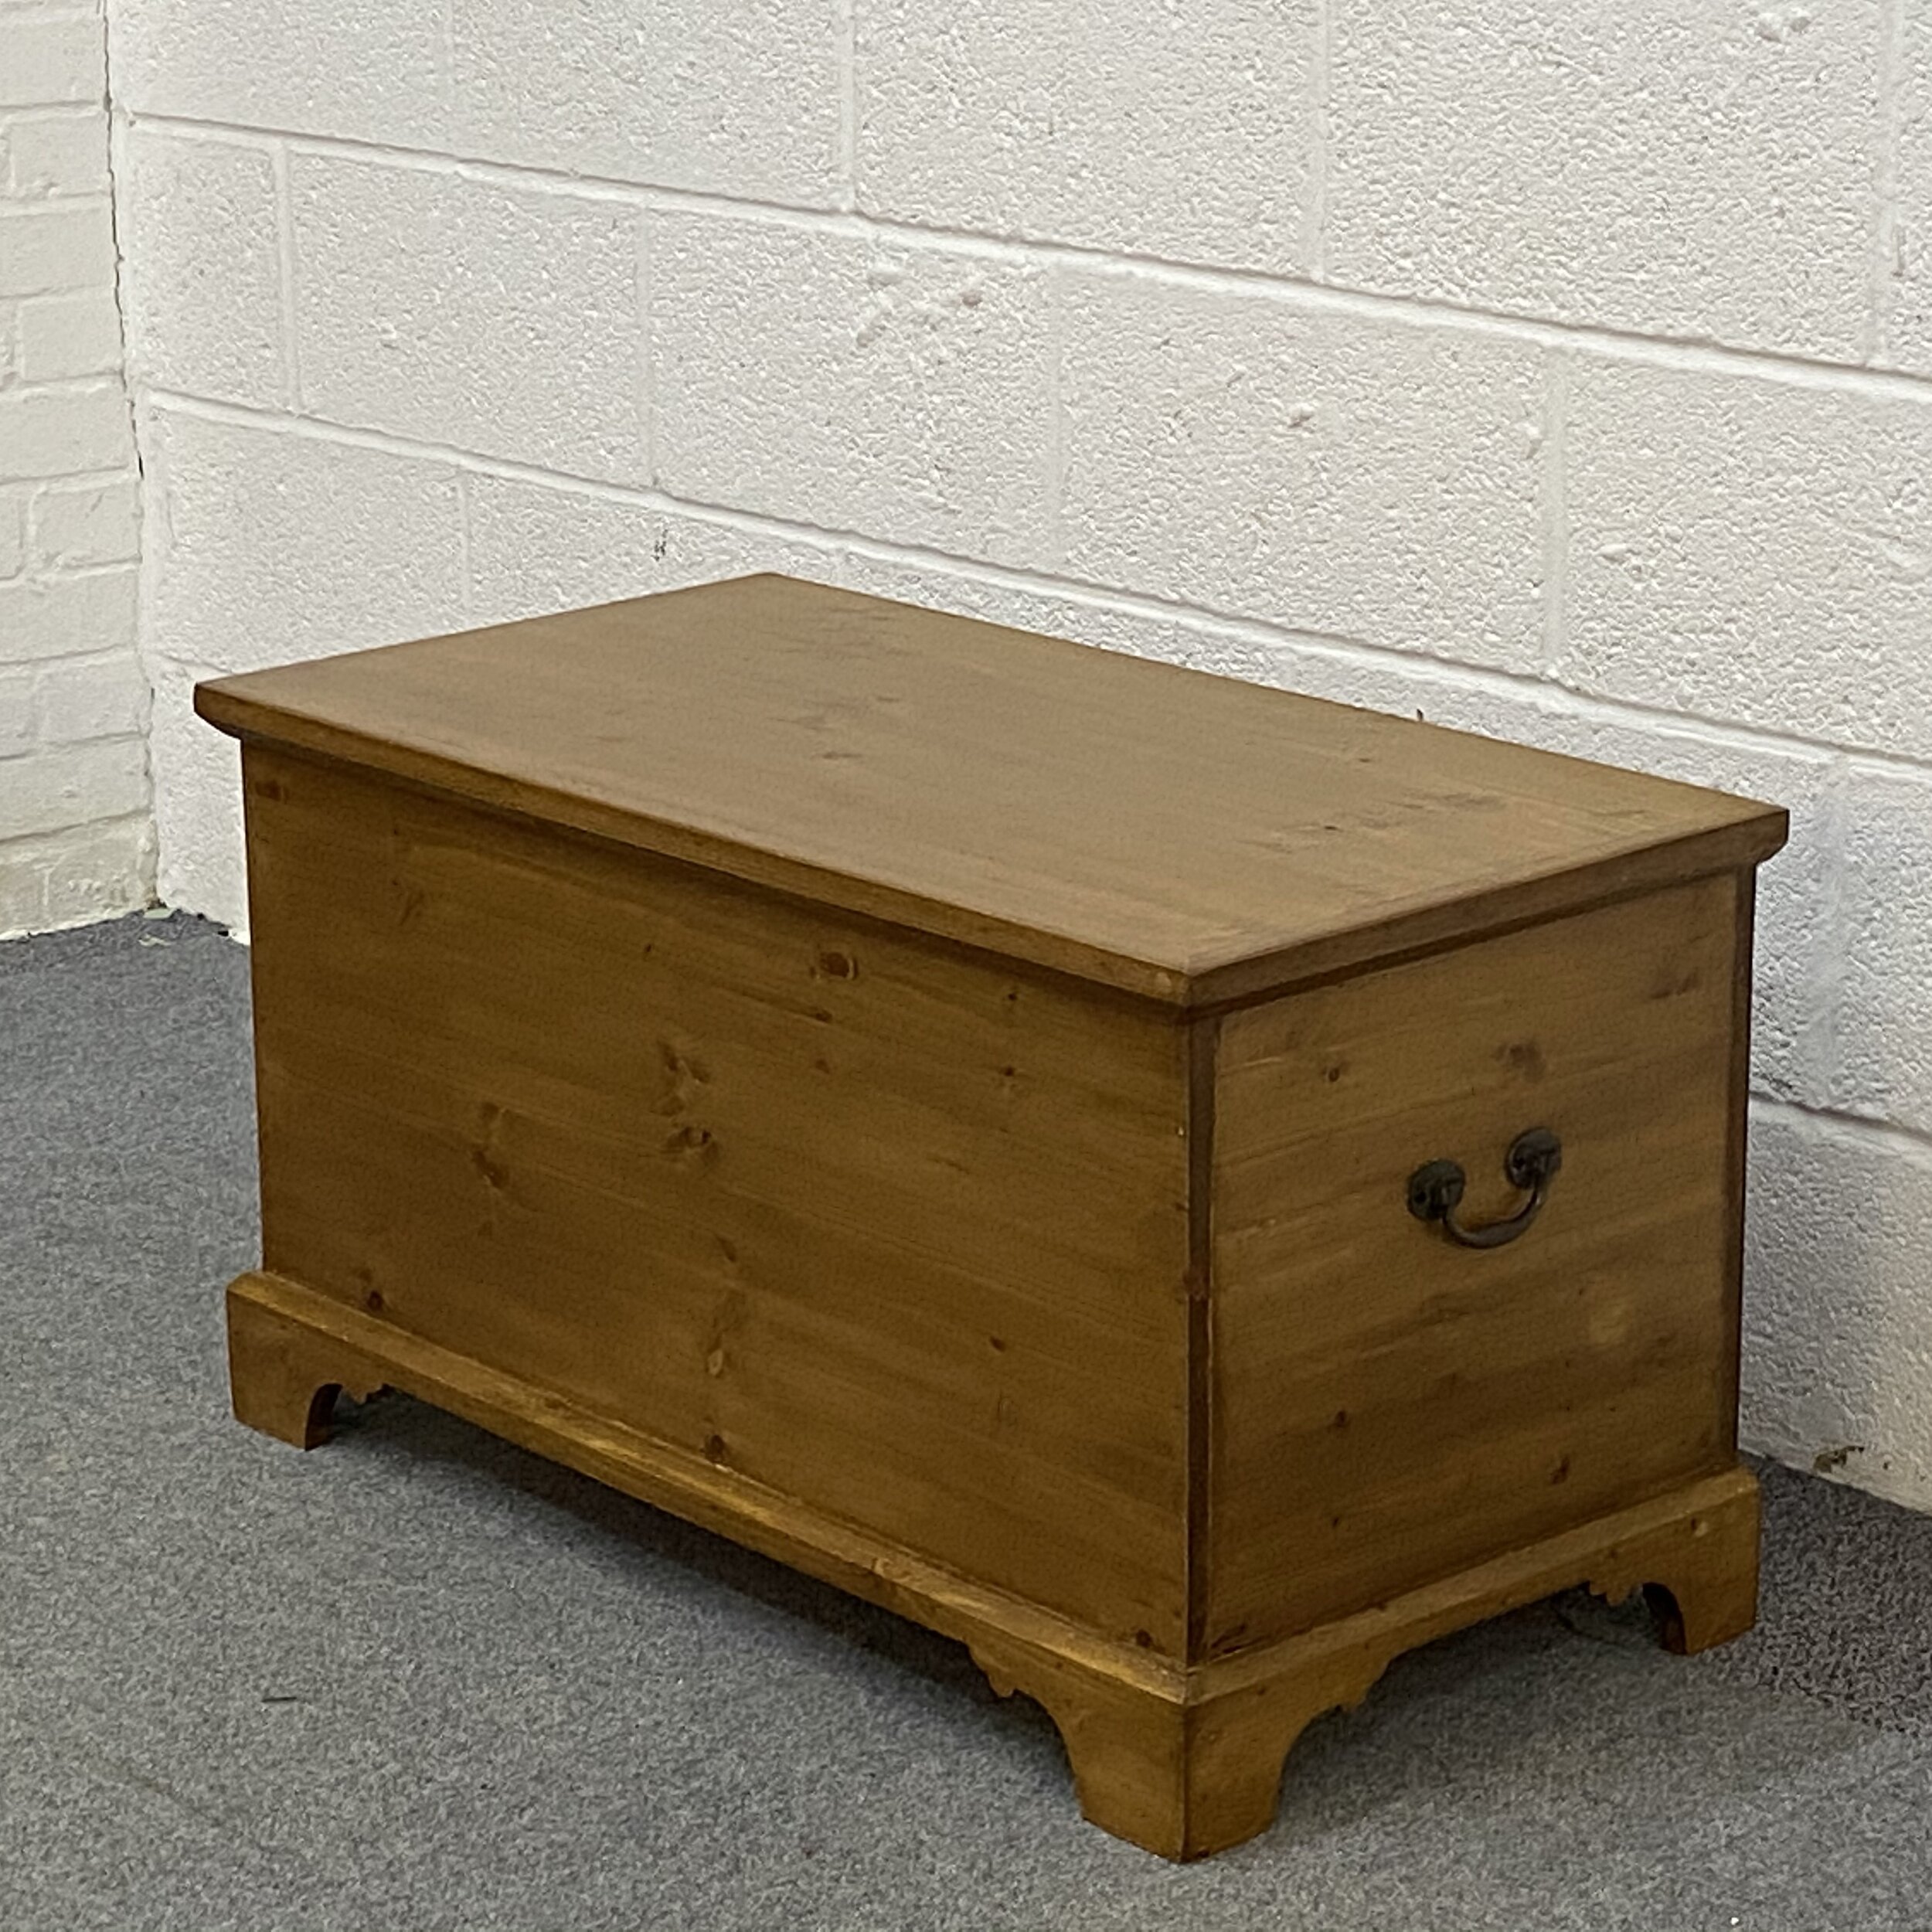 Pine box with carrying handles